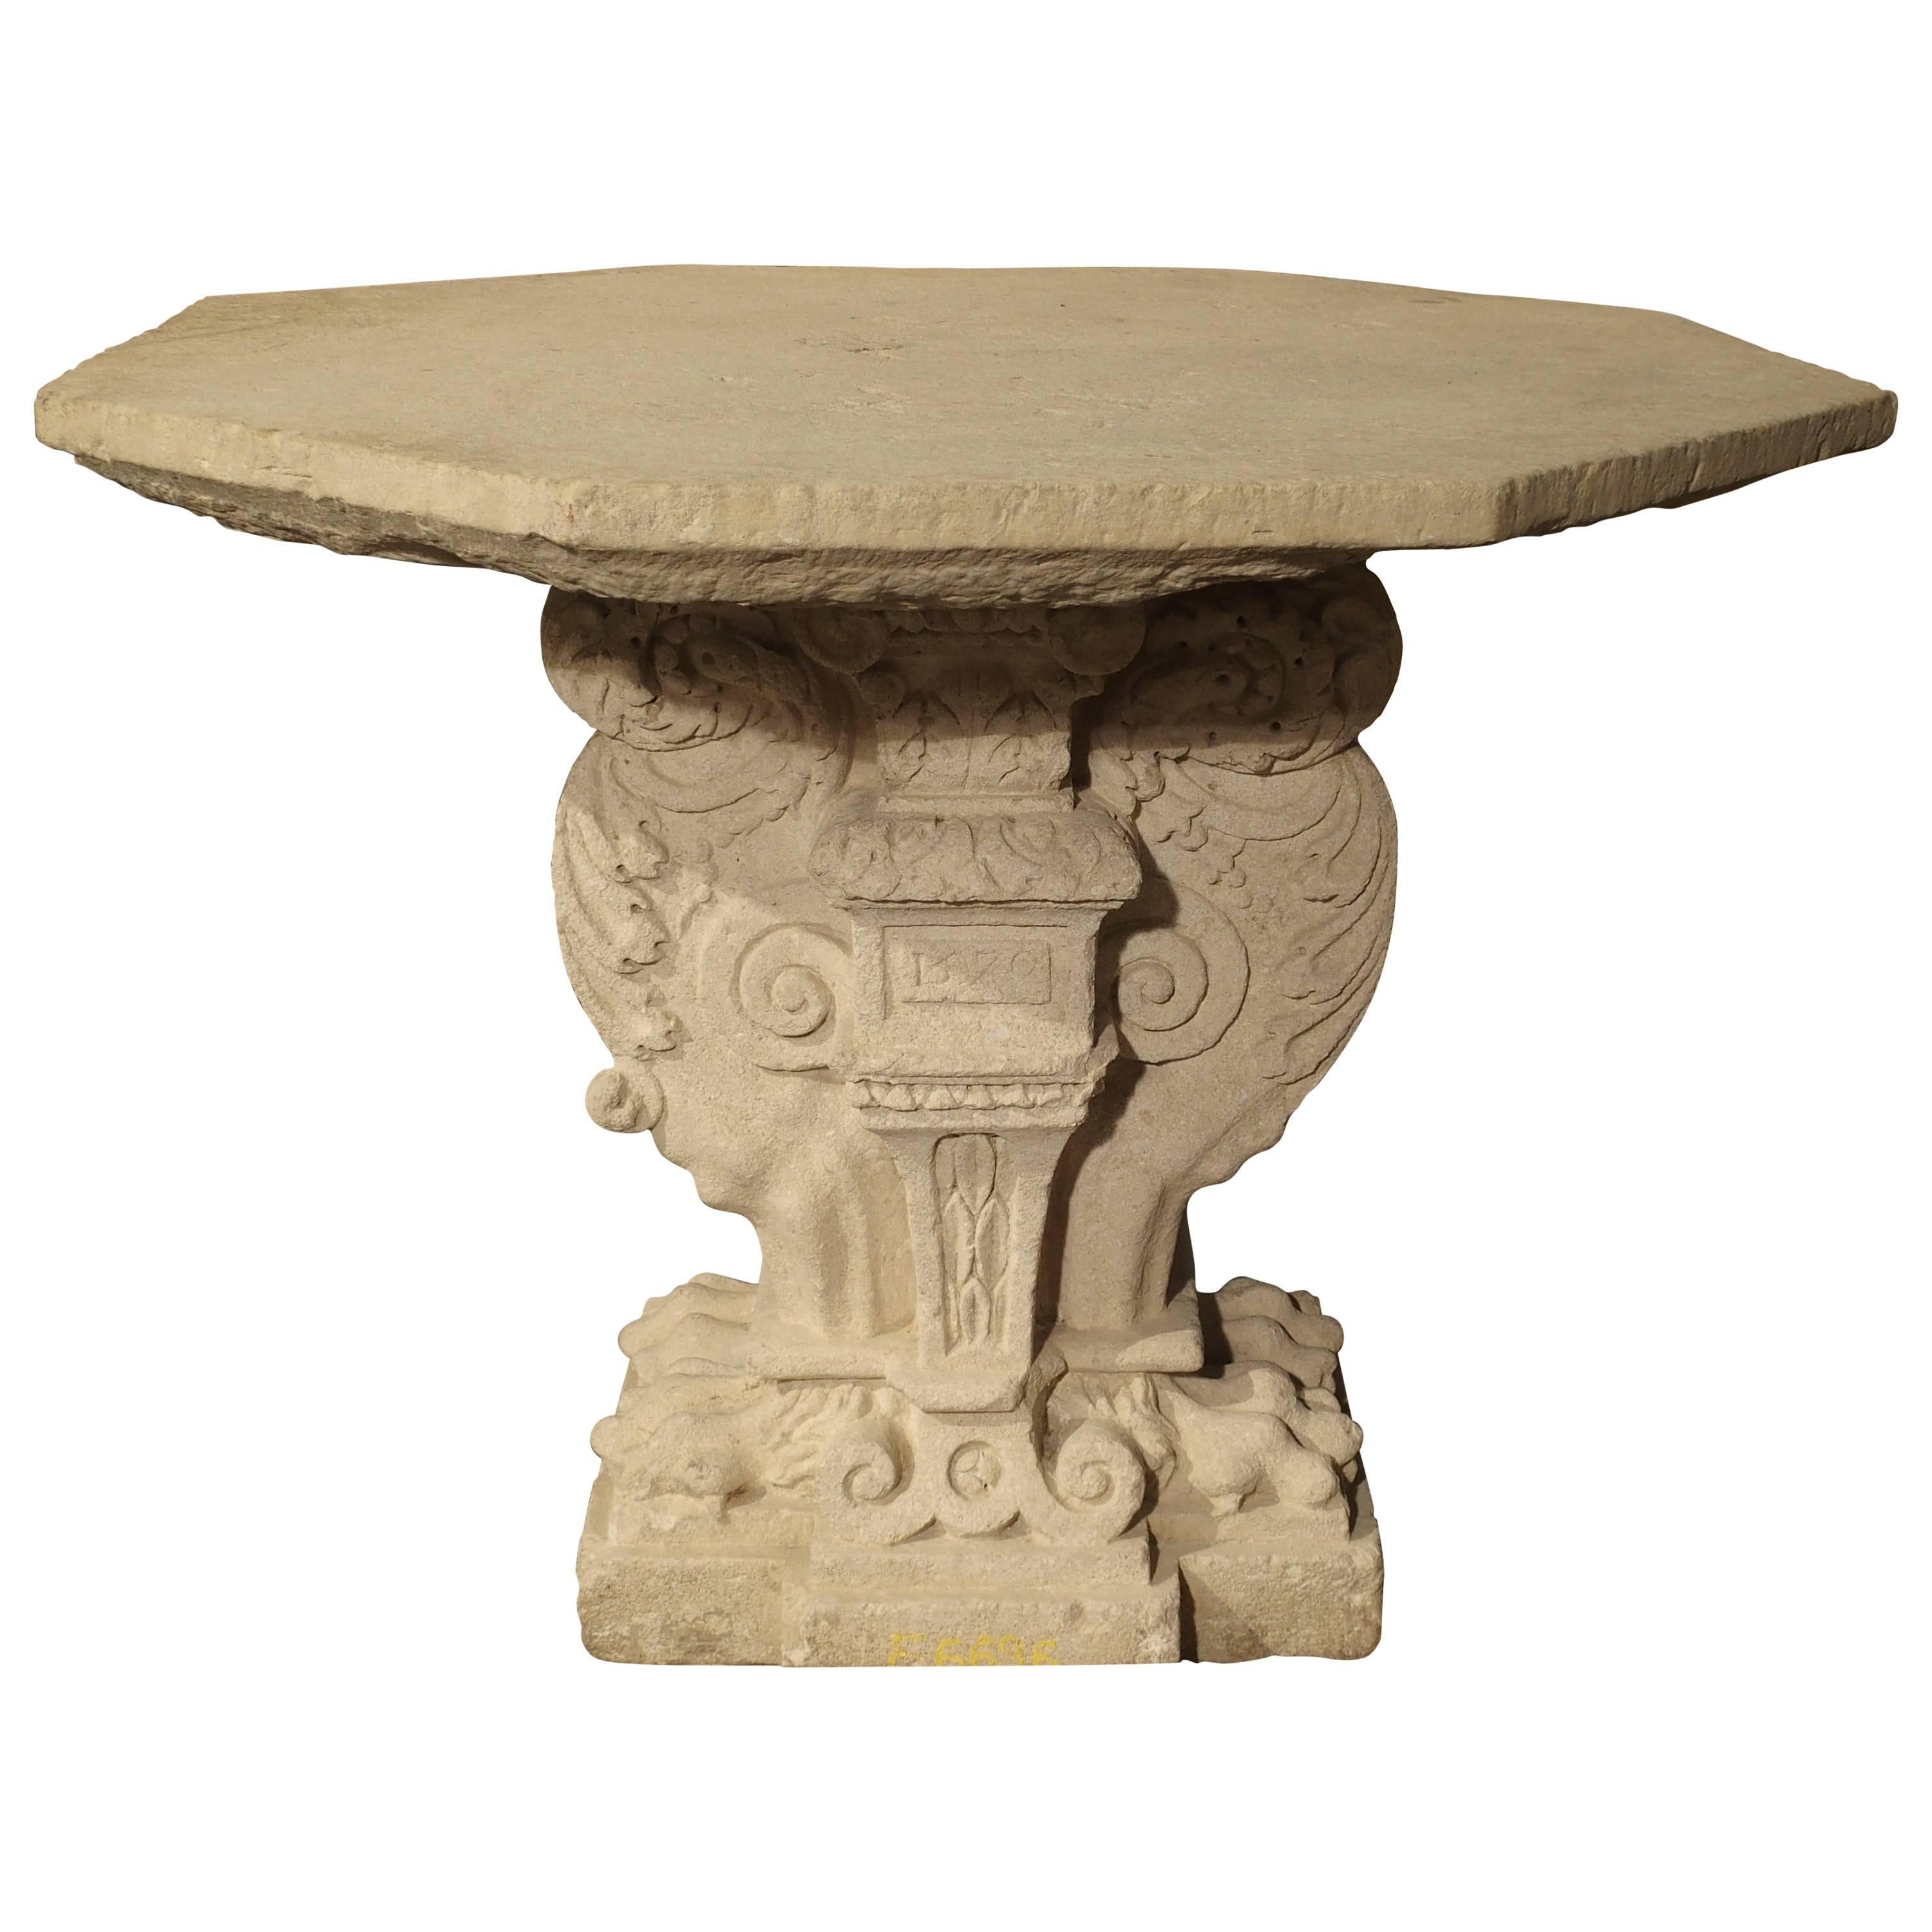 Rare Period Renaissance Stone Table from the South of France